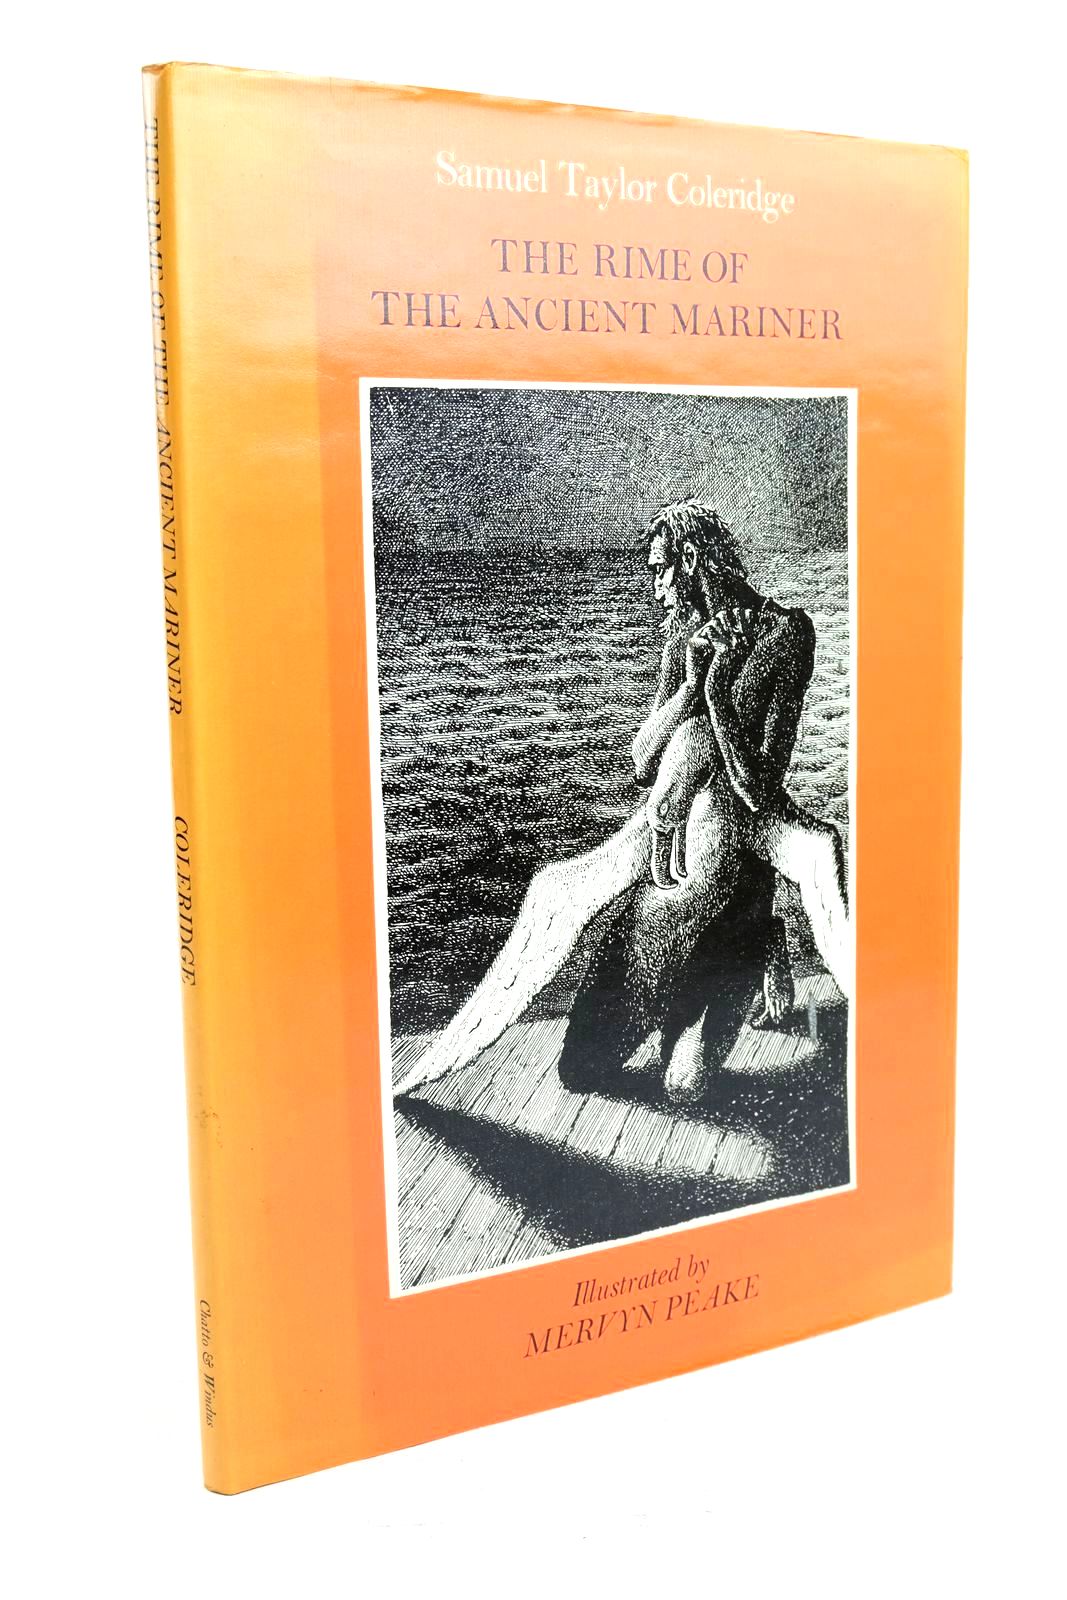 Photo of THE RIME OF THE ANCIENT MARINER- Stock Number: 1321111